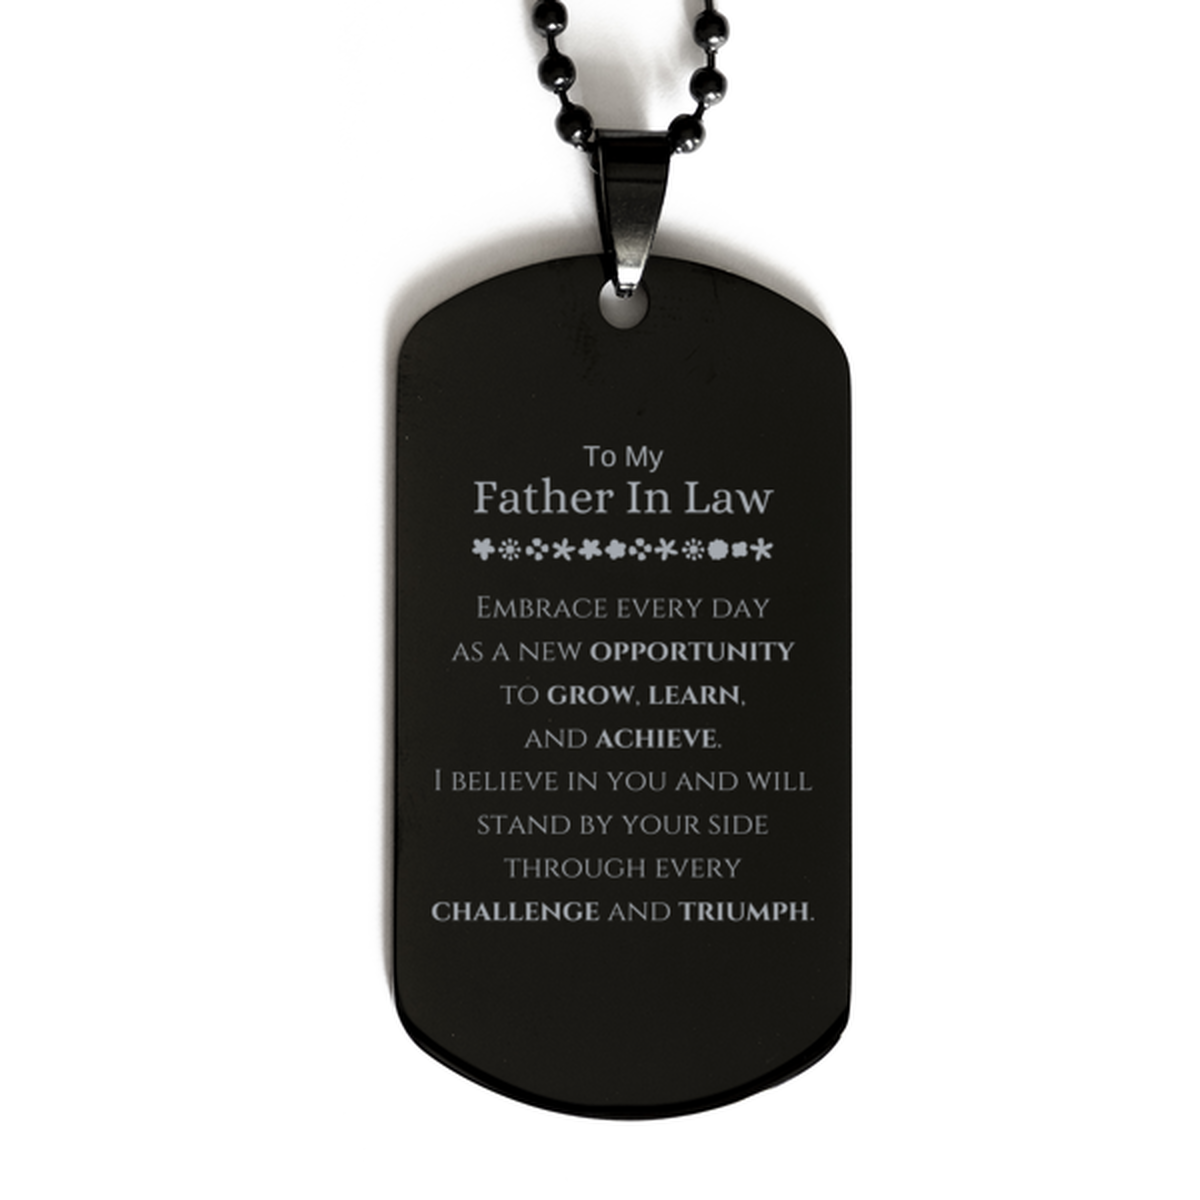 To My Father In Law Gifts, I believe in you and will stand by your side, Inspirational Black Dog Tag For Father In Law, Birthday Christmas Motivational Father In Law Gifts